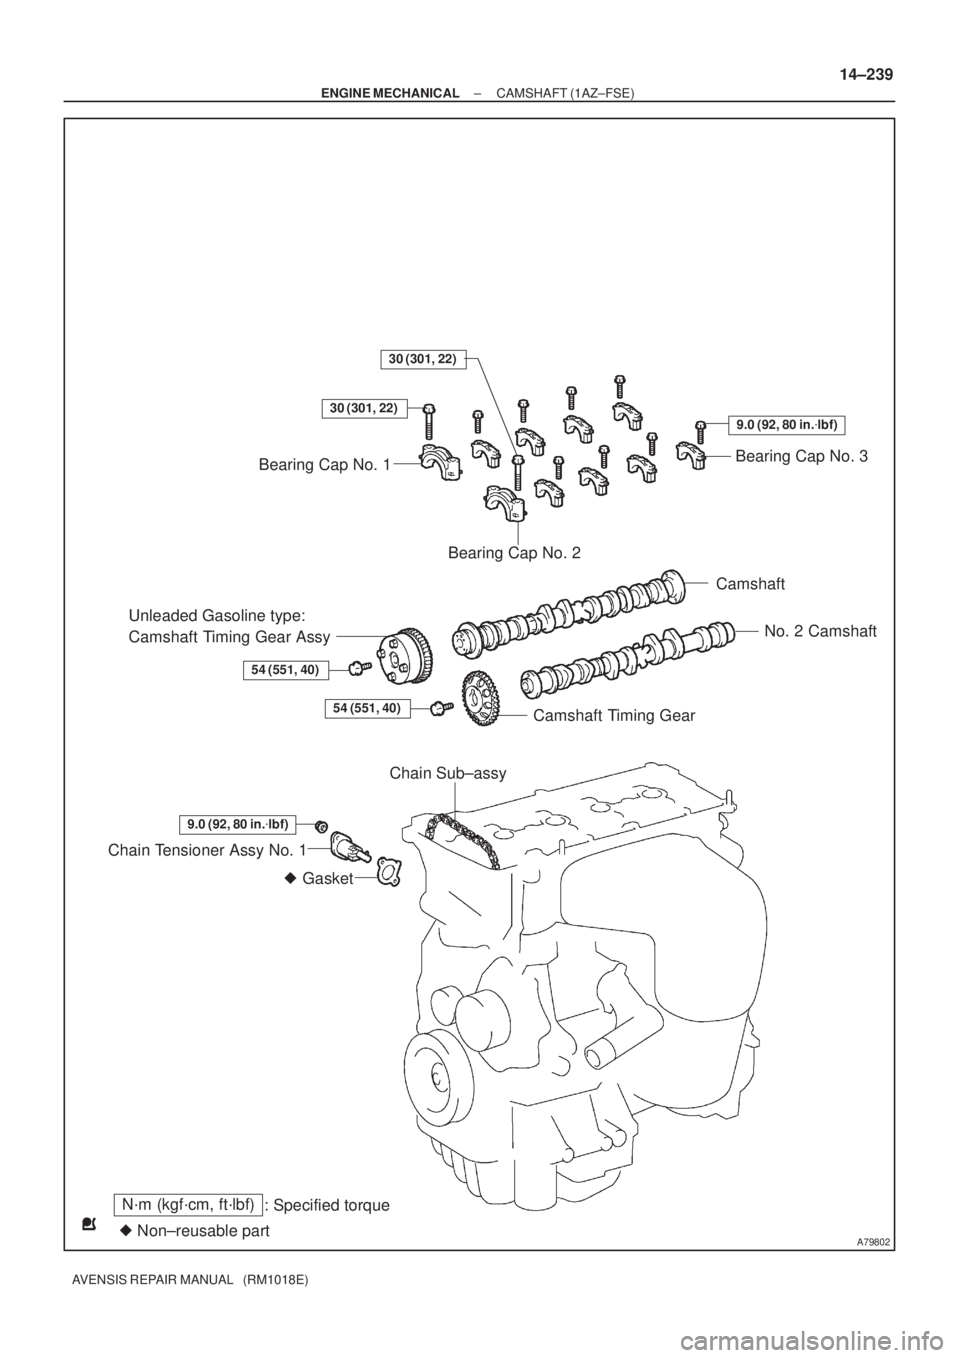 TOYOTA AVENSIS 2005  Service Repair Manual A79802
N´m (kgf´cm, ft´lbf)
: Specified torque
 Non±reusable part Gasket
Bearing Cap No. 3
Bearing Cap No. 2
Camshaft
No. 2 Camshaft
Camshaft Timing Gear
Unleaded Gasoline type: 
Camshaft Timing